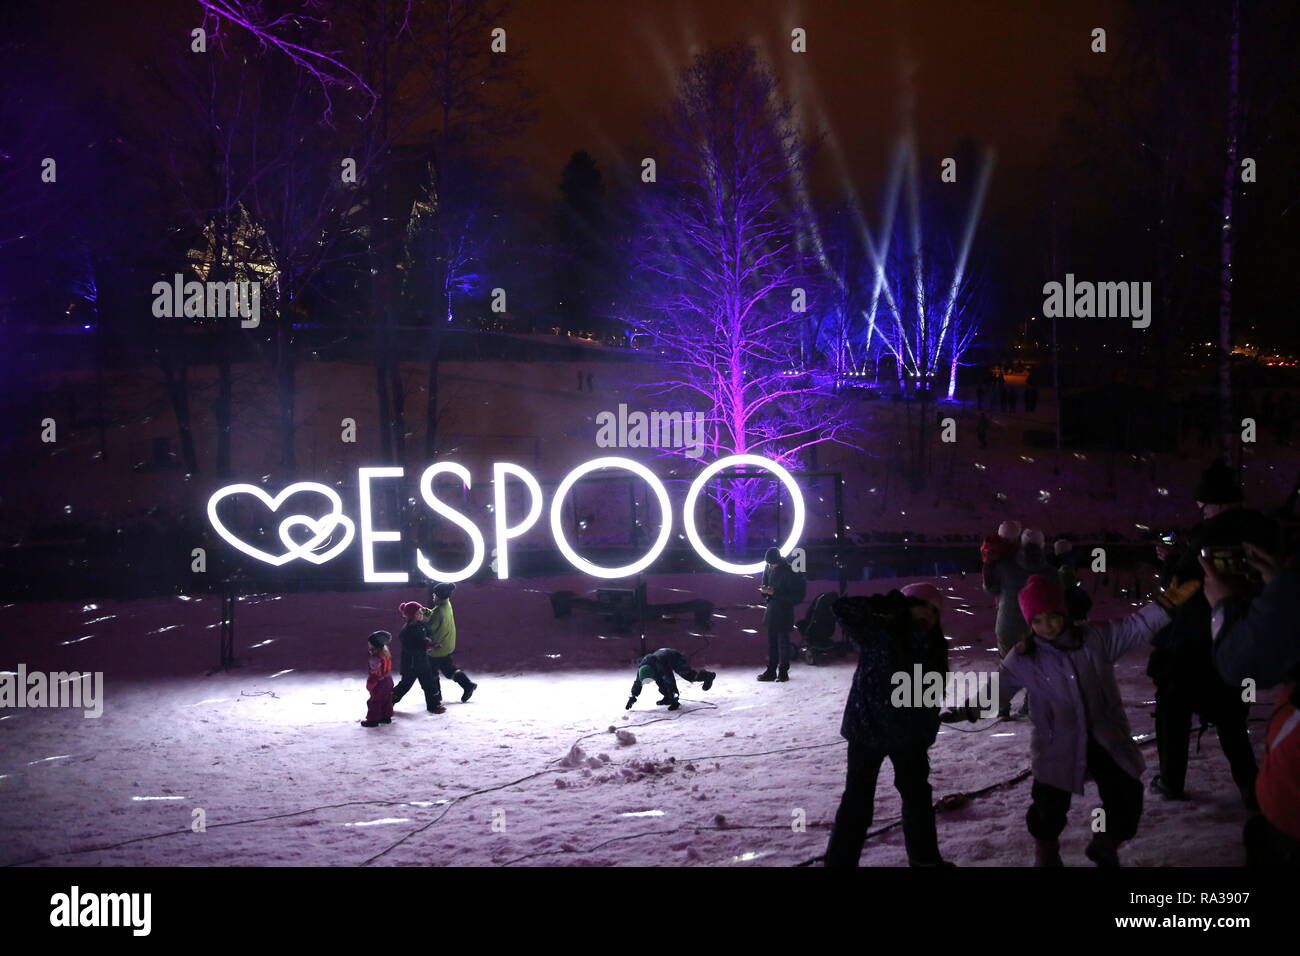 (190101) --ESPOO, Jan. 1, 2019 (Xinhua) -- People play in the park decorated with light arts during a massive laser show held to celebrate the New Year in the city of Espoo, Finland, on Dec. 31, 2018. Espoo becomes the first city in Finland to replace fireworks with laser show when celebrating the New Year. The public demand for banning the use of fireworks is constantly rising in recent years in Finland, aiming to reduce the cases of injuries, air pollution and stress and anxiety in animals caused by fireworks. (Xinhua/Li Jizhi) Stock Photo